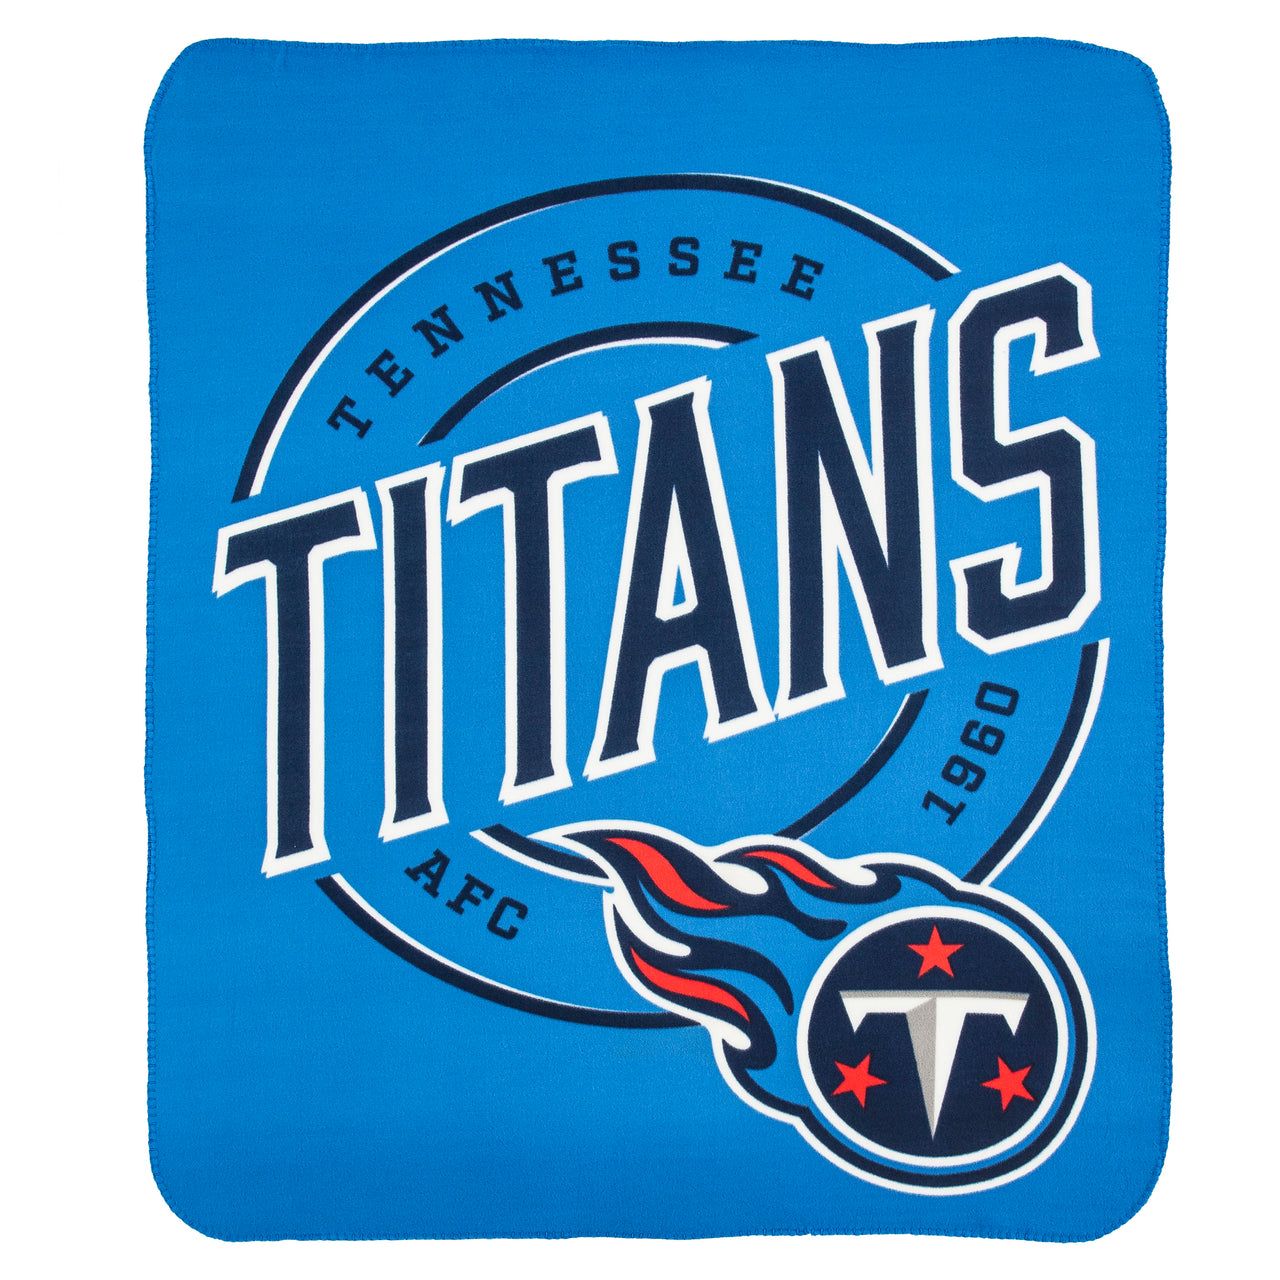 Tennessee Titans 50" x 60" Campaign Fleece Blanket - Dynasty Sports & Framing 